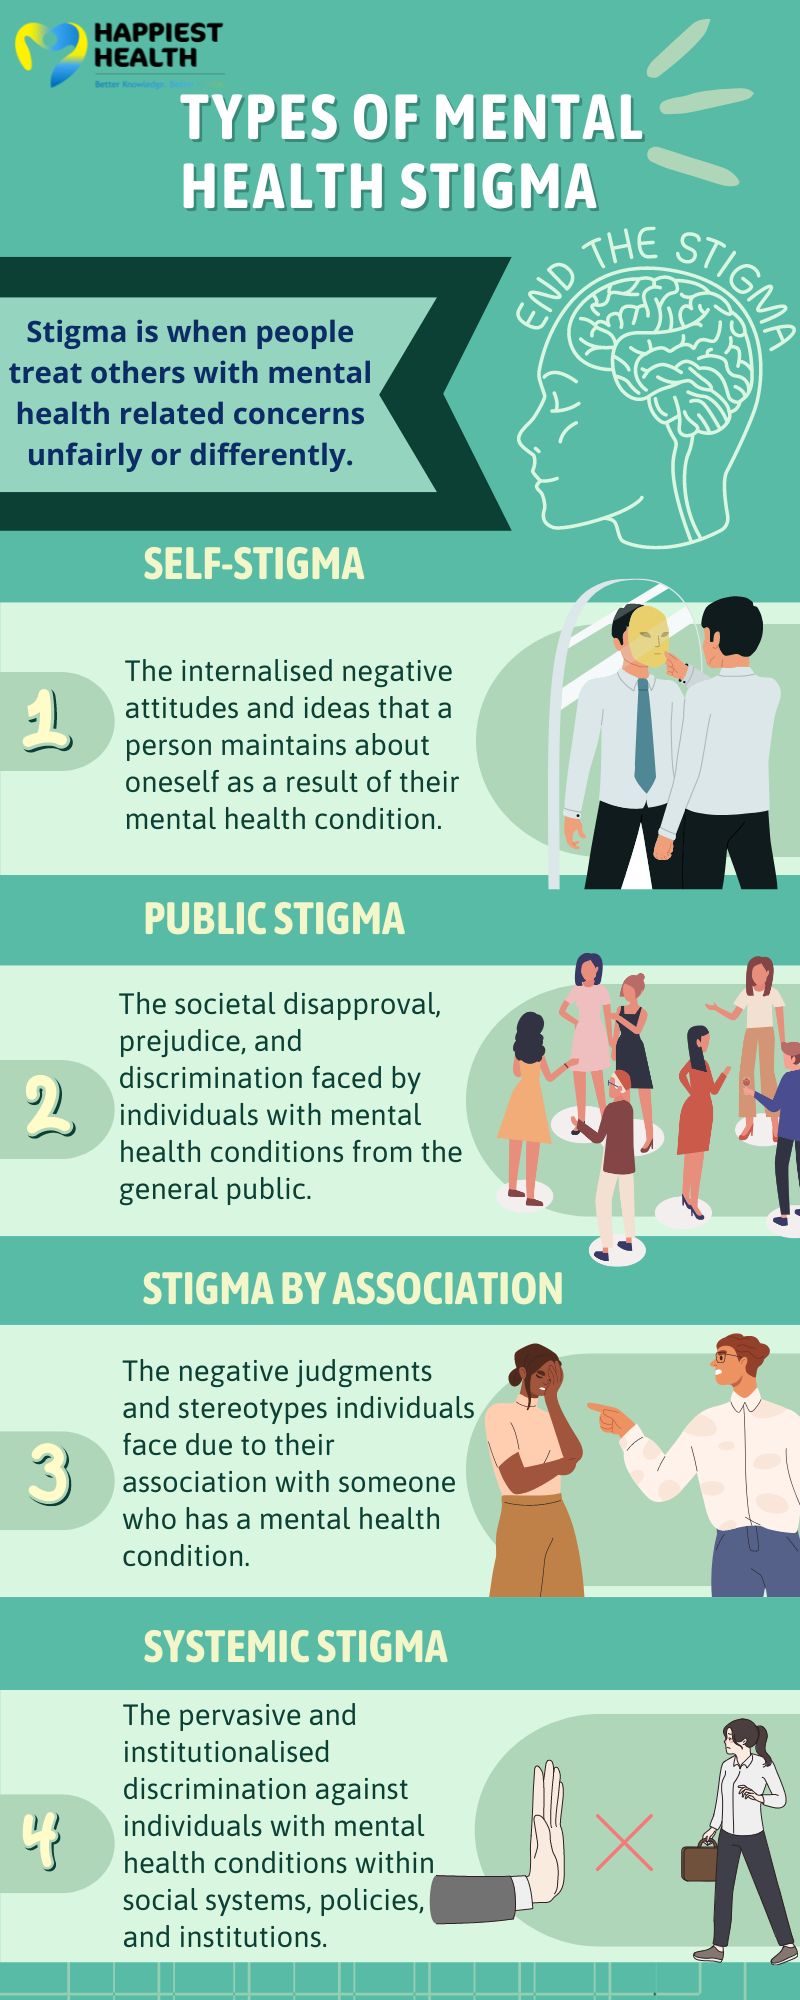 An infographic describing the types of mental health related stigmas